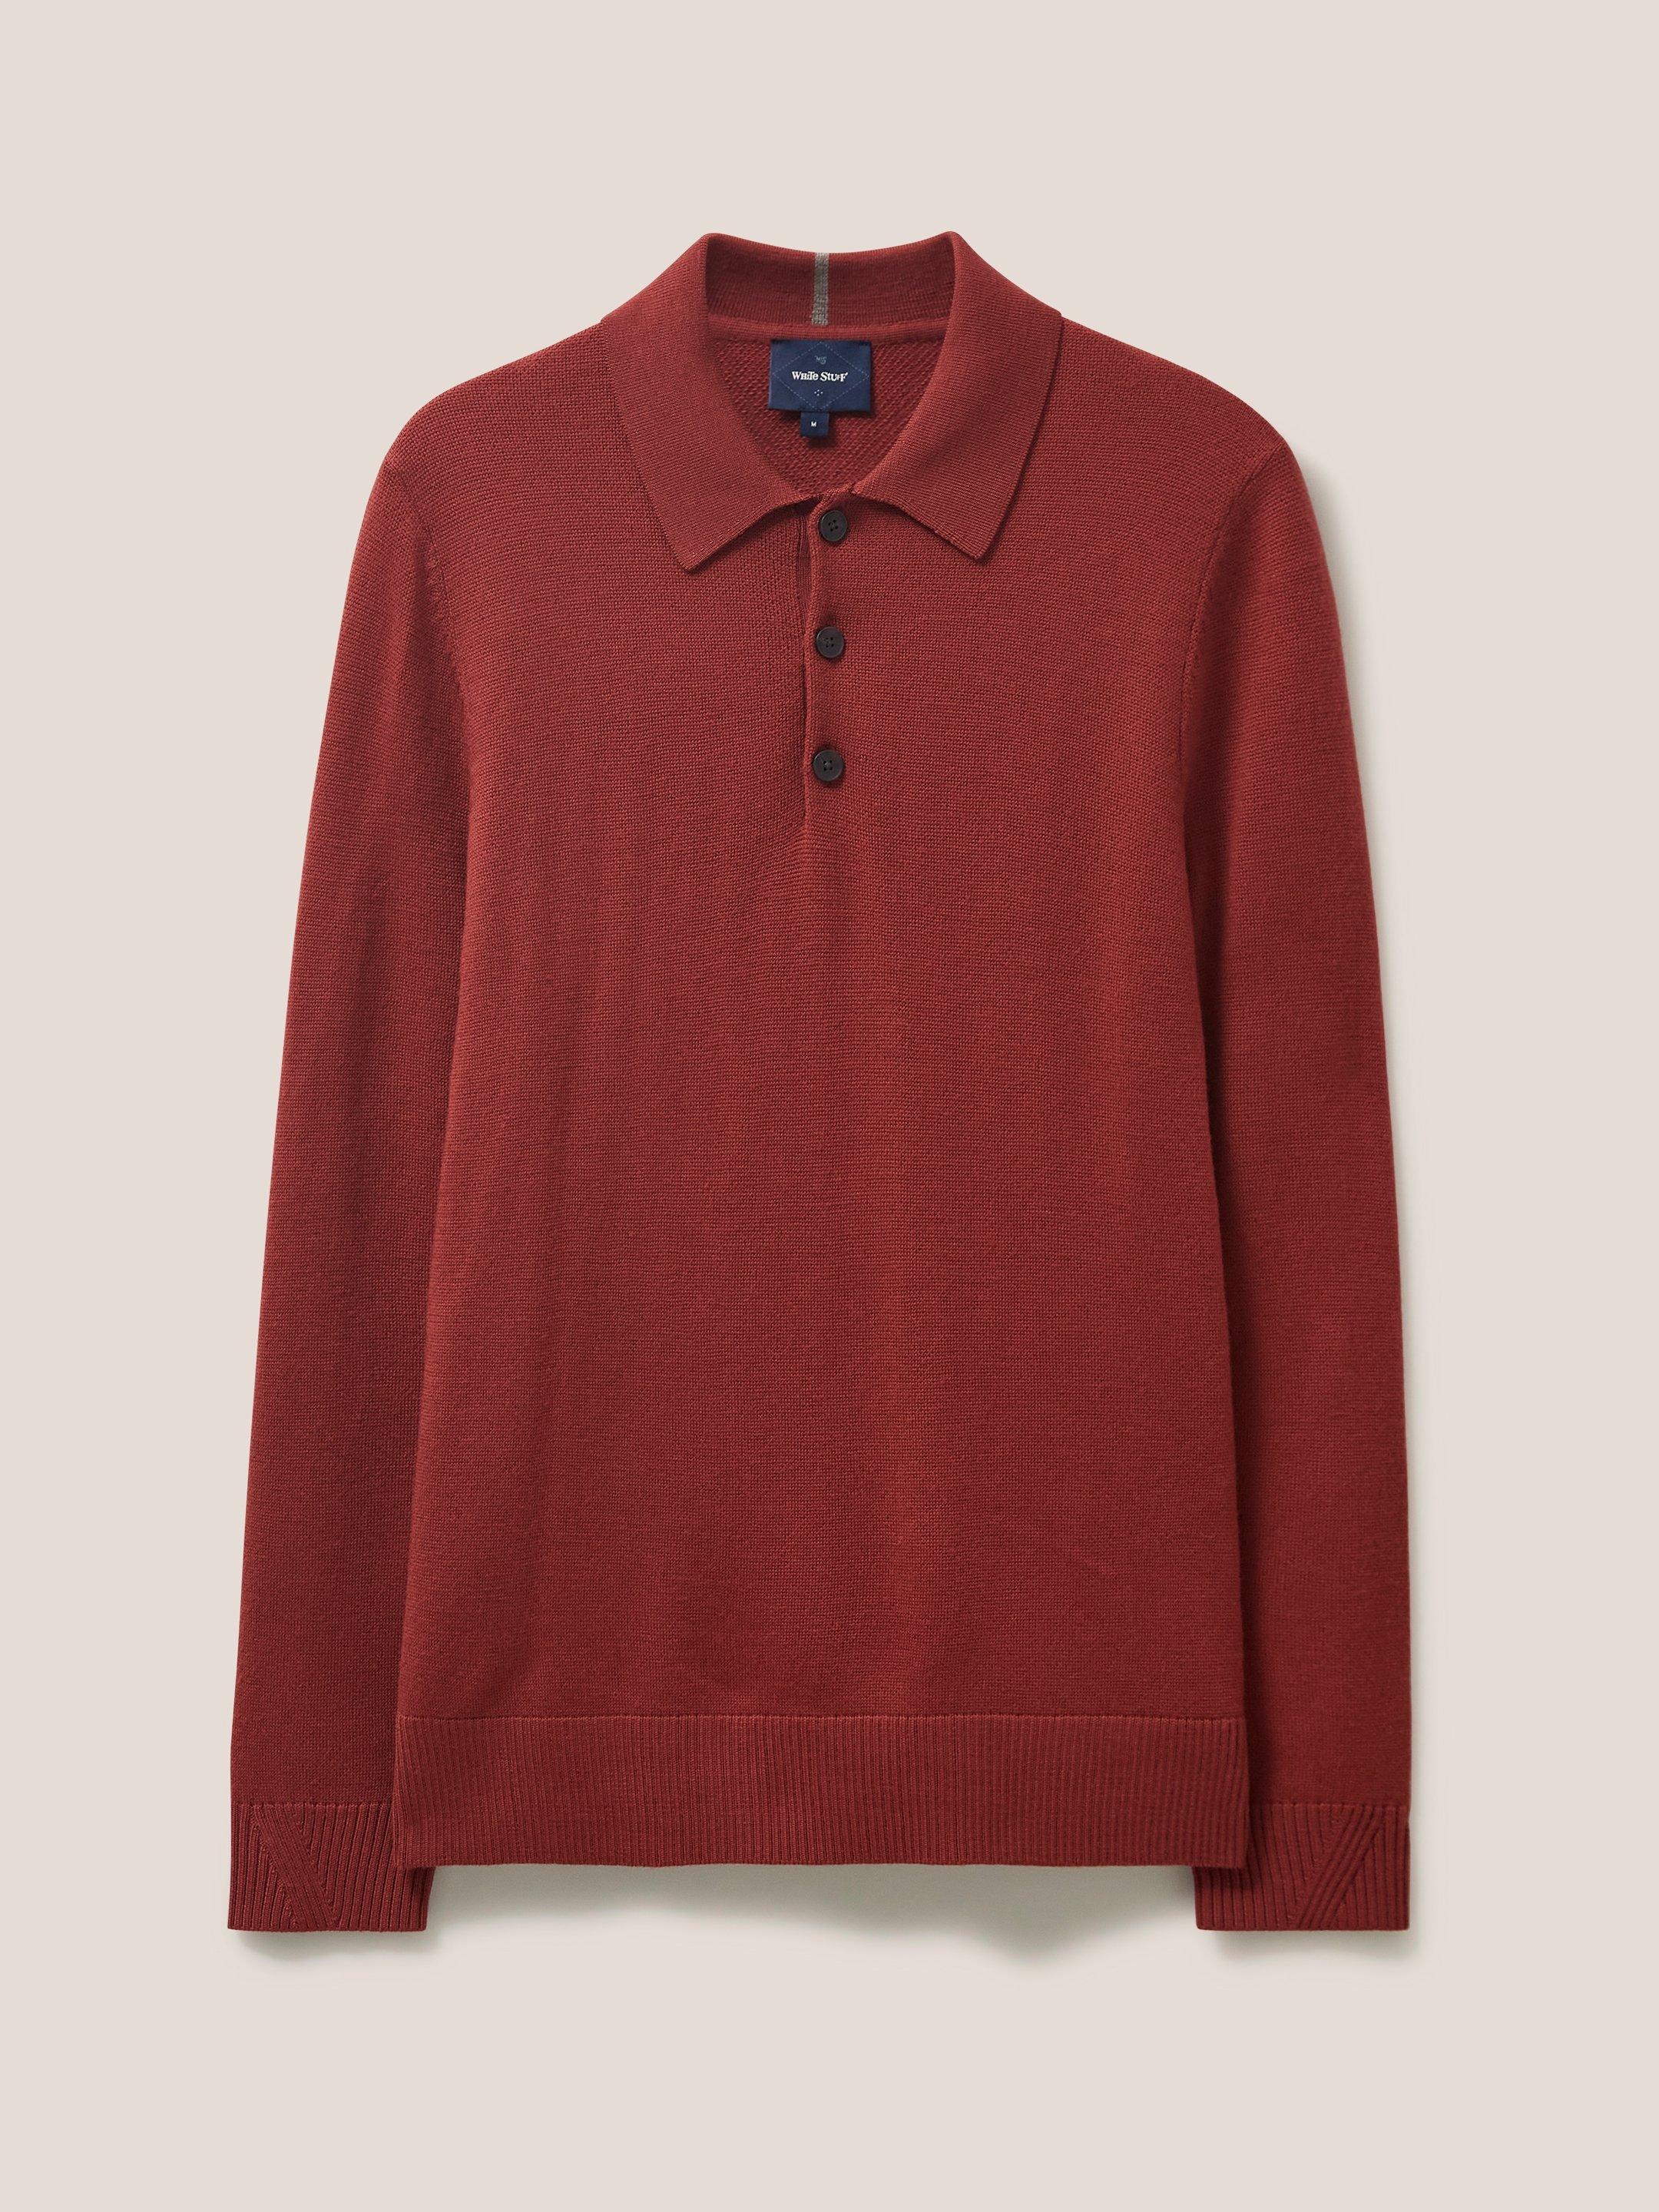 Newport Merino Polo in DEEP RED - FLAT FRONT